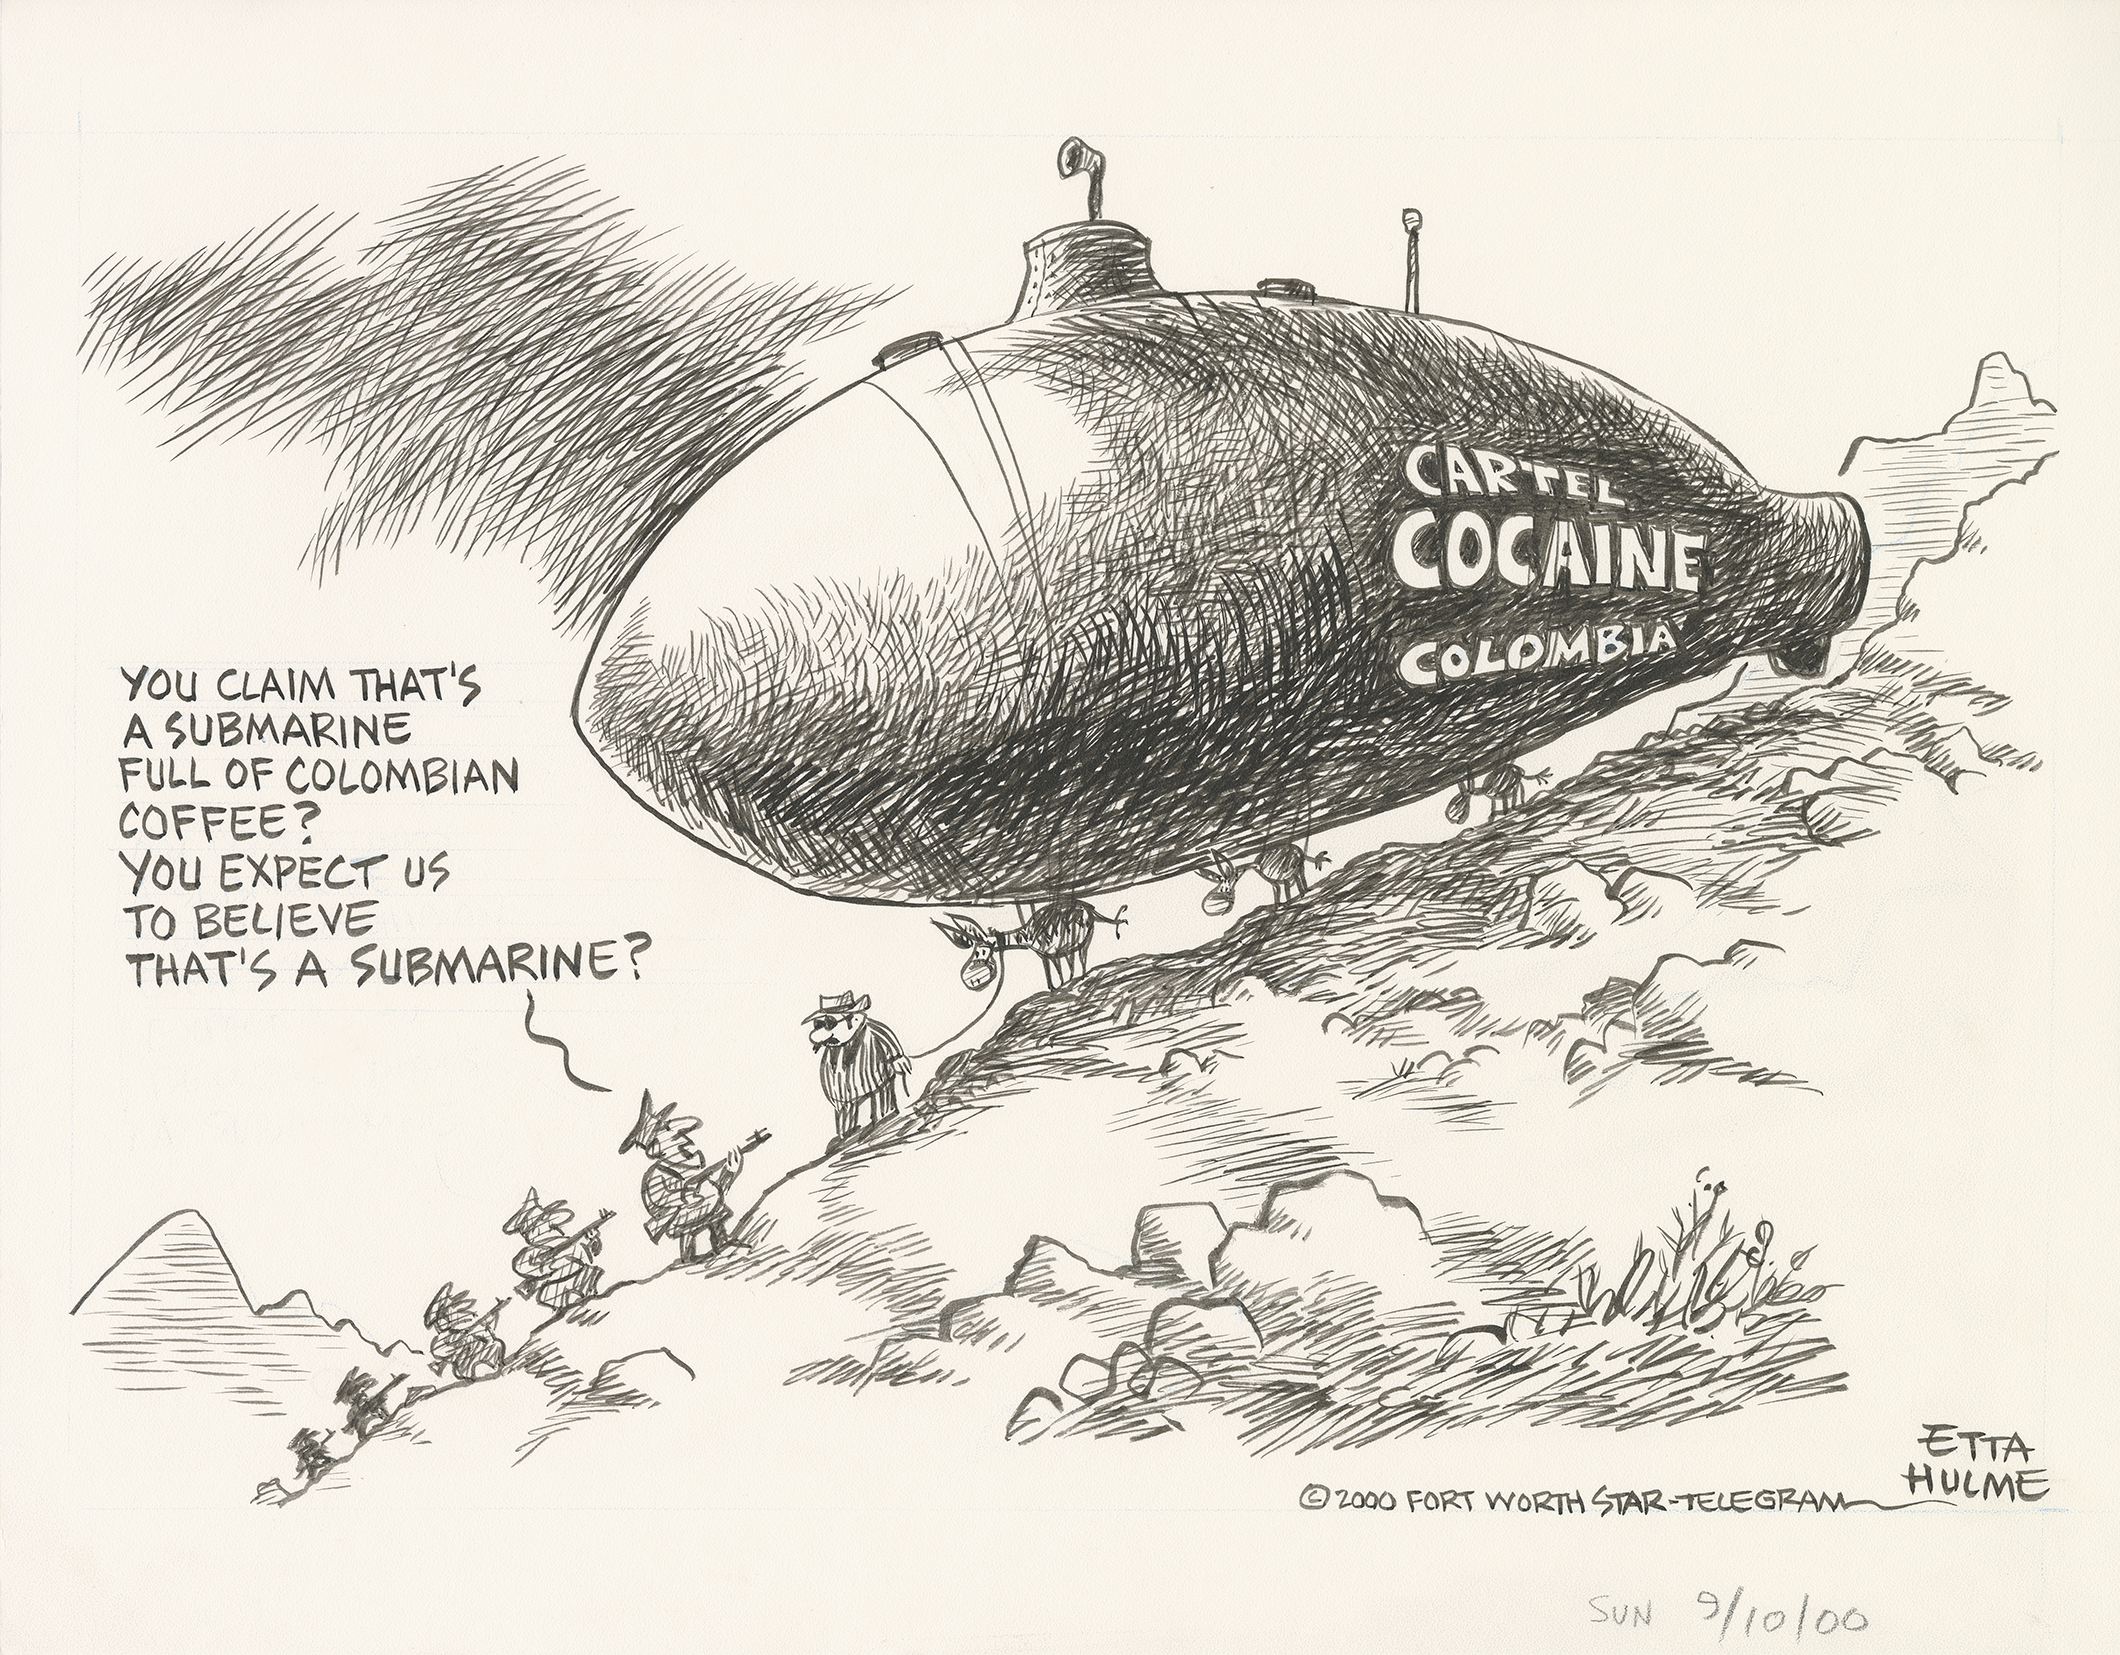 Political Cartoon showing a large submarine labeled, "cartel cocaine colombia"